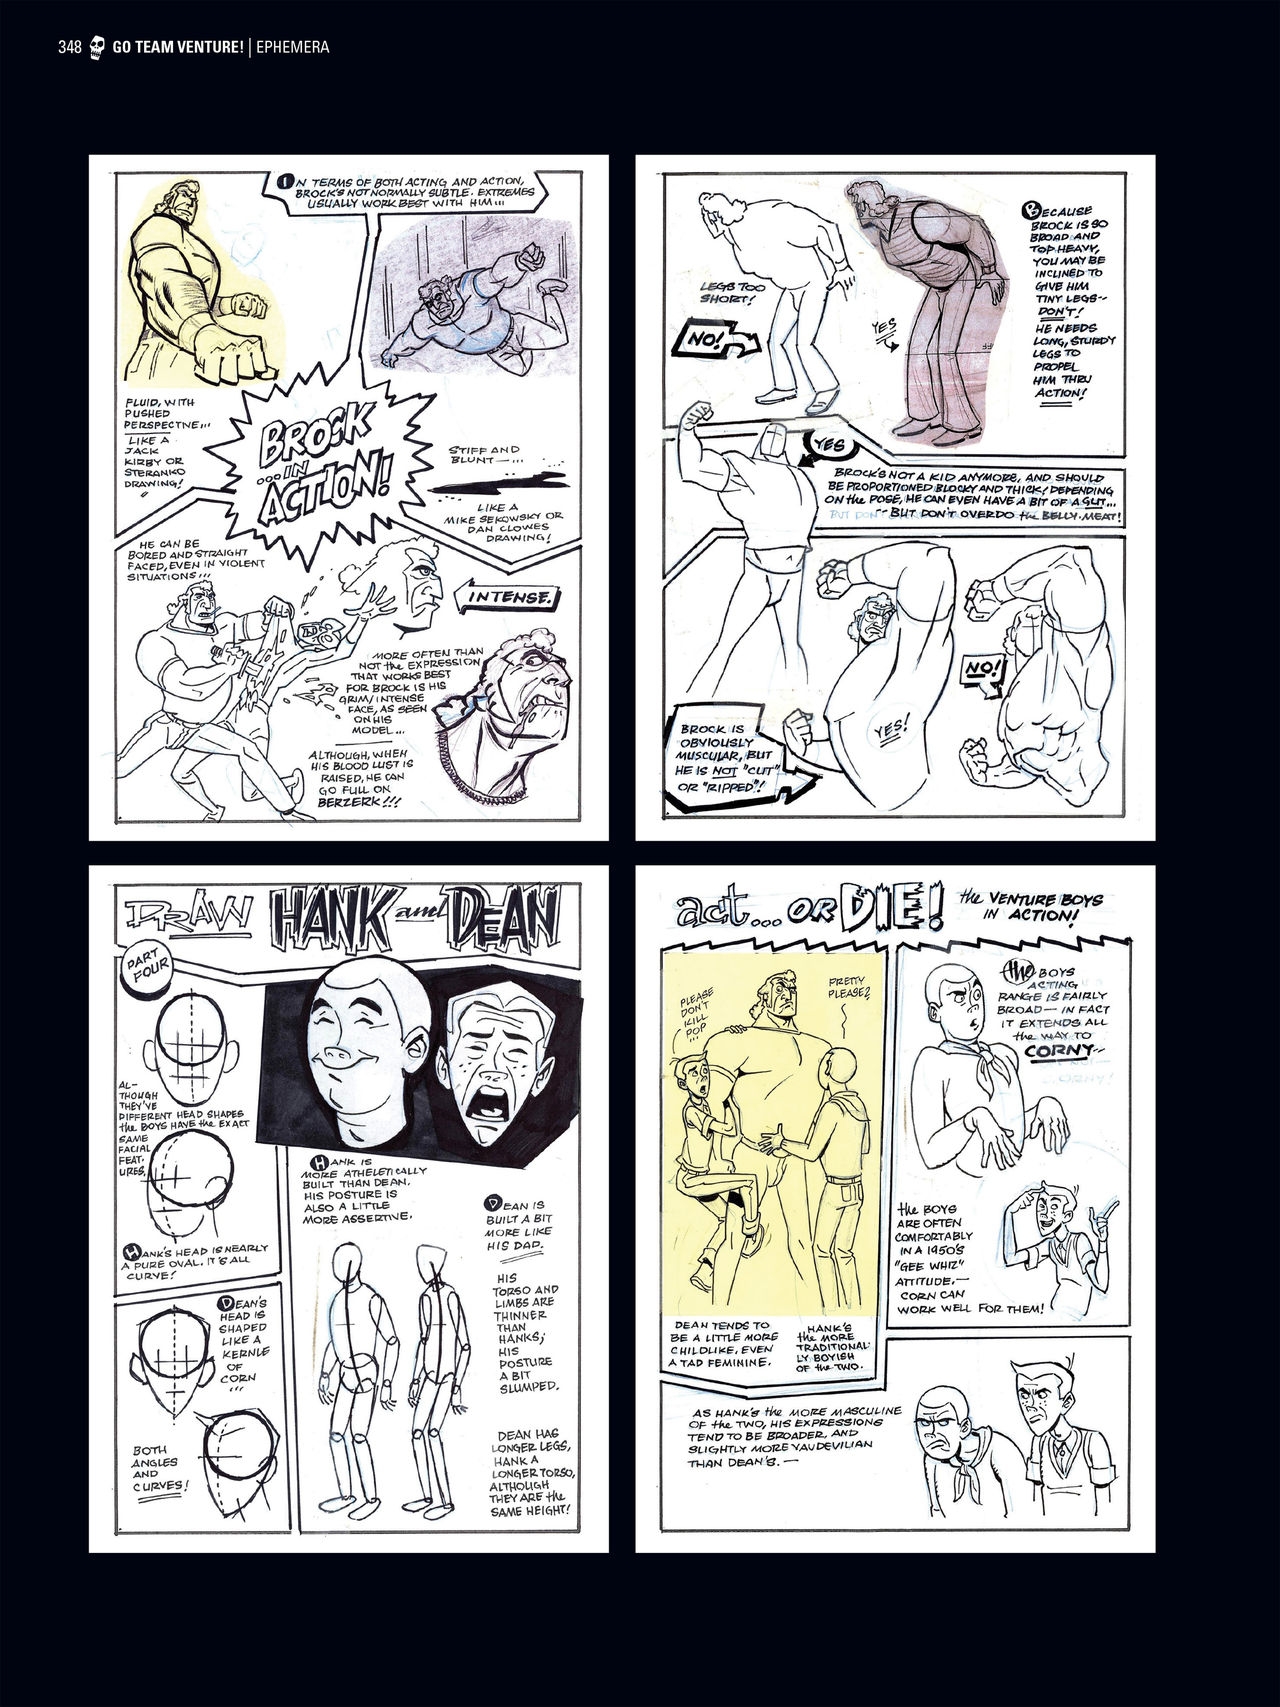 Go Team Venture! - The Art and Making of the Venture Bros 346